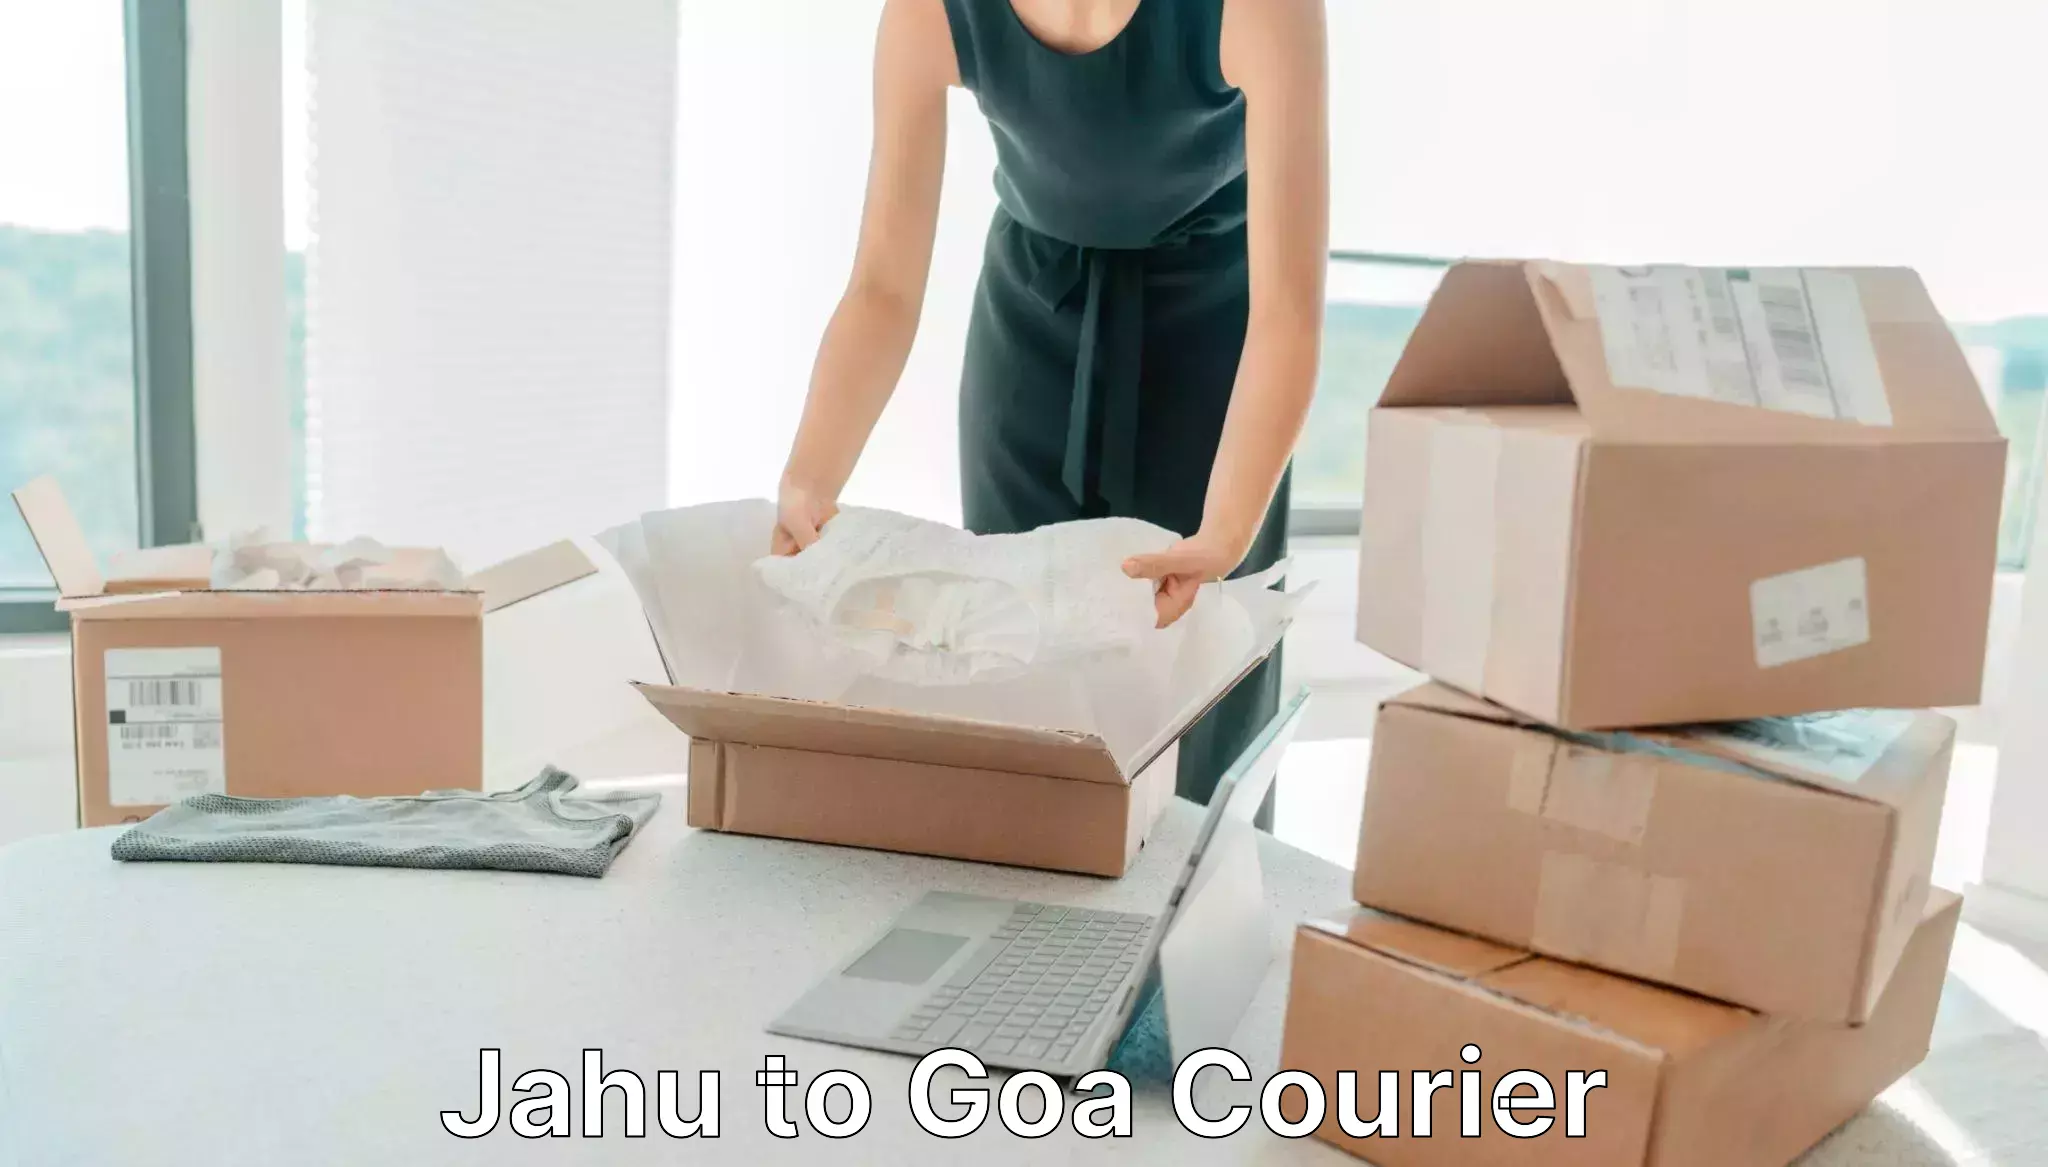 Express delivery network Jahu to Goa